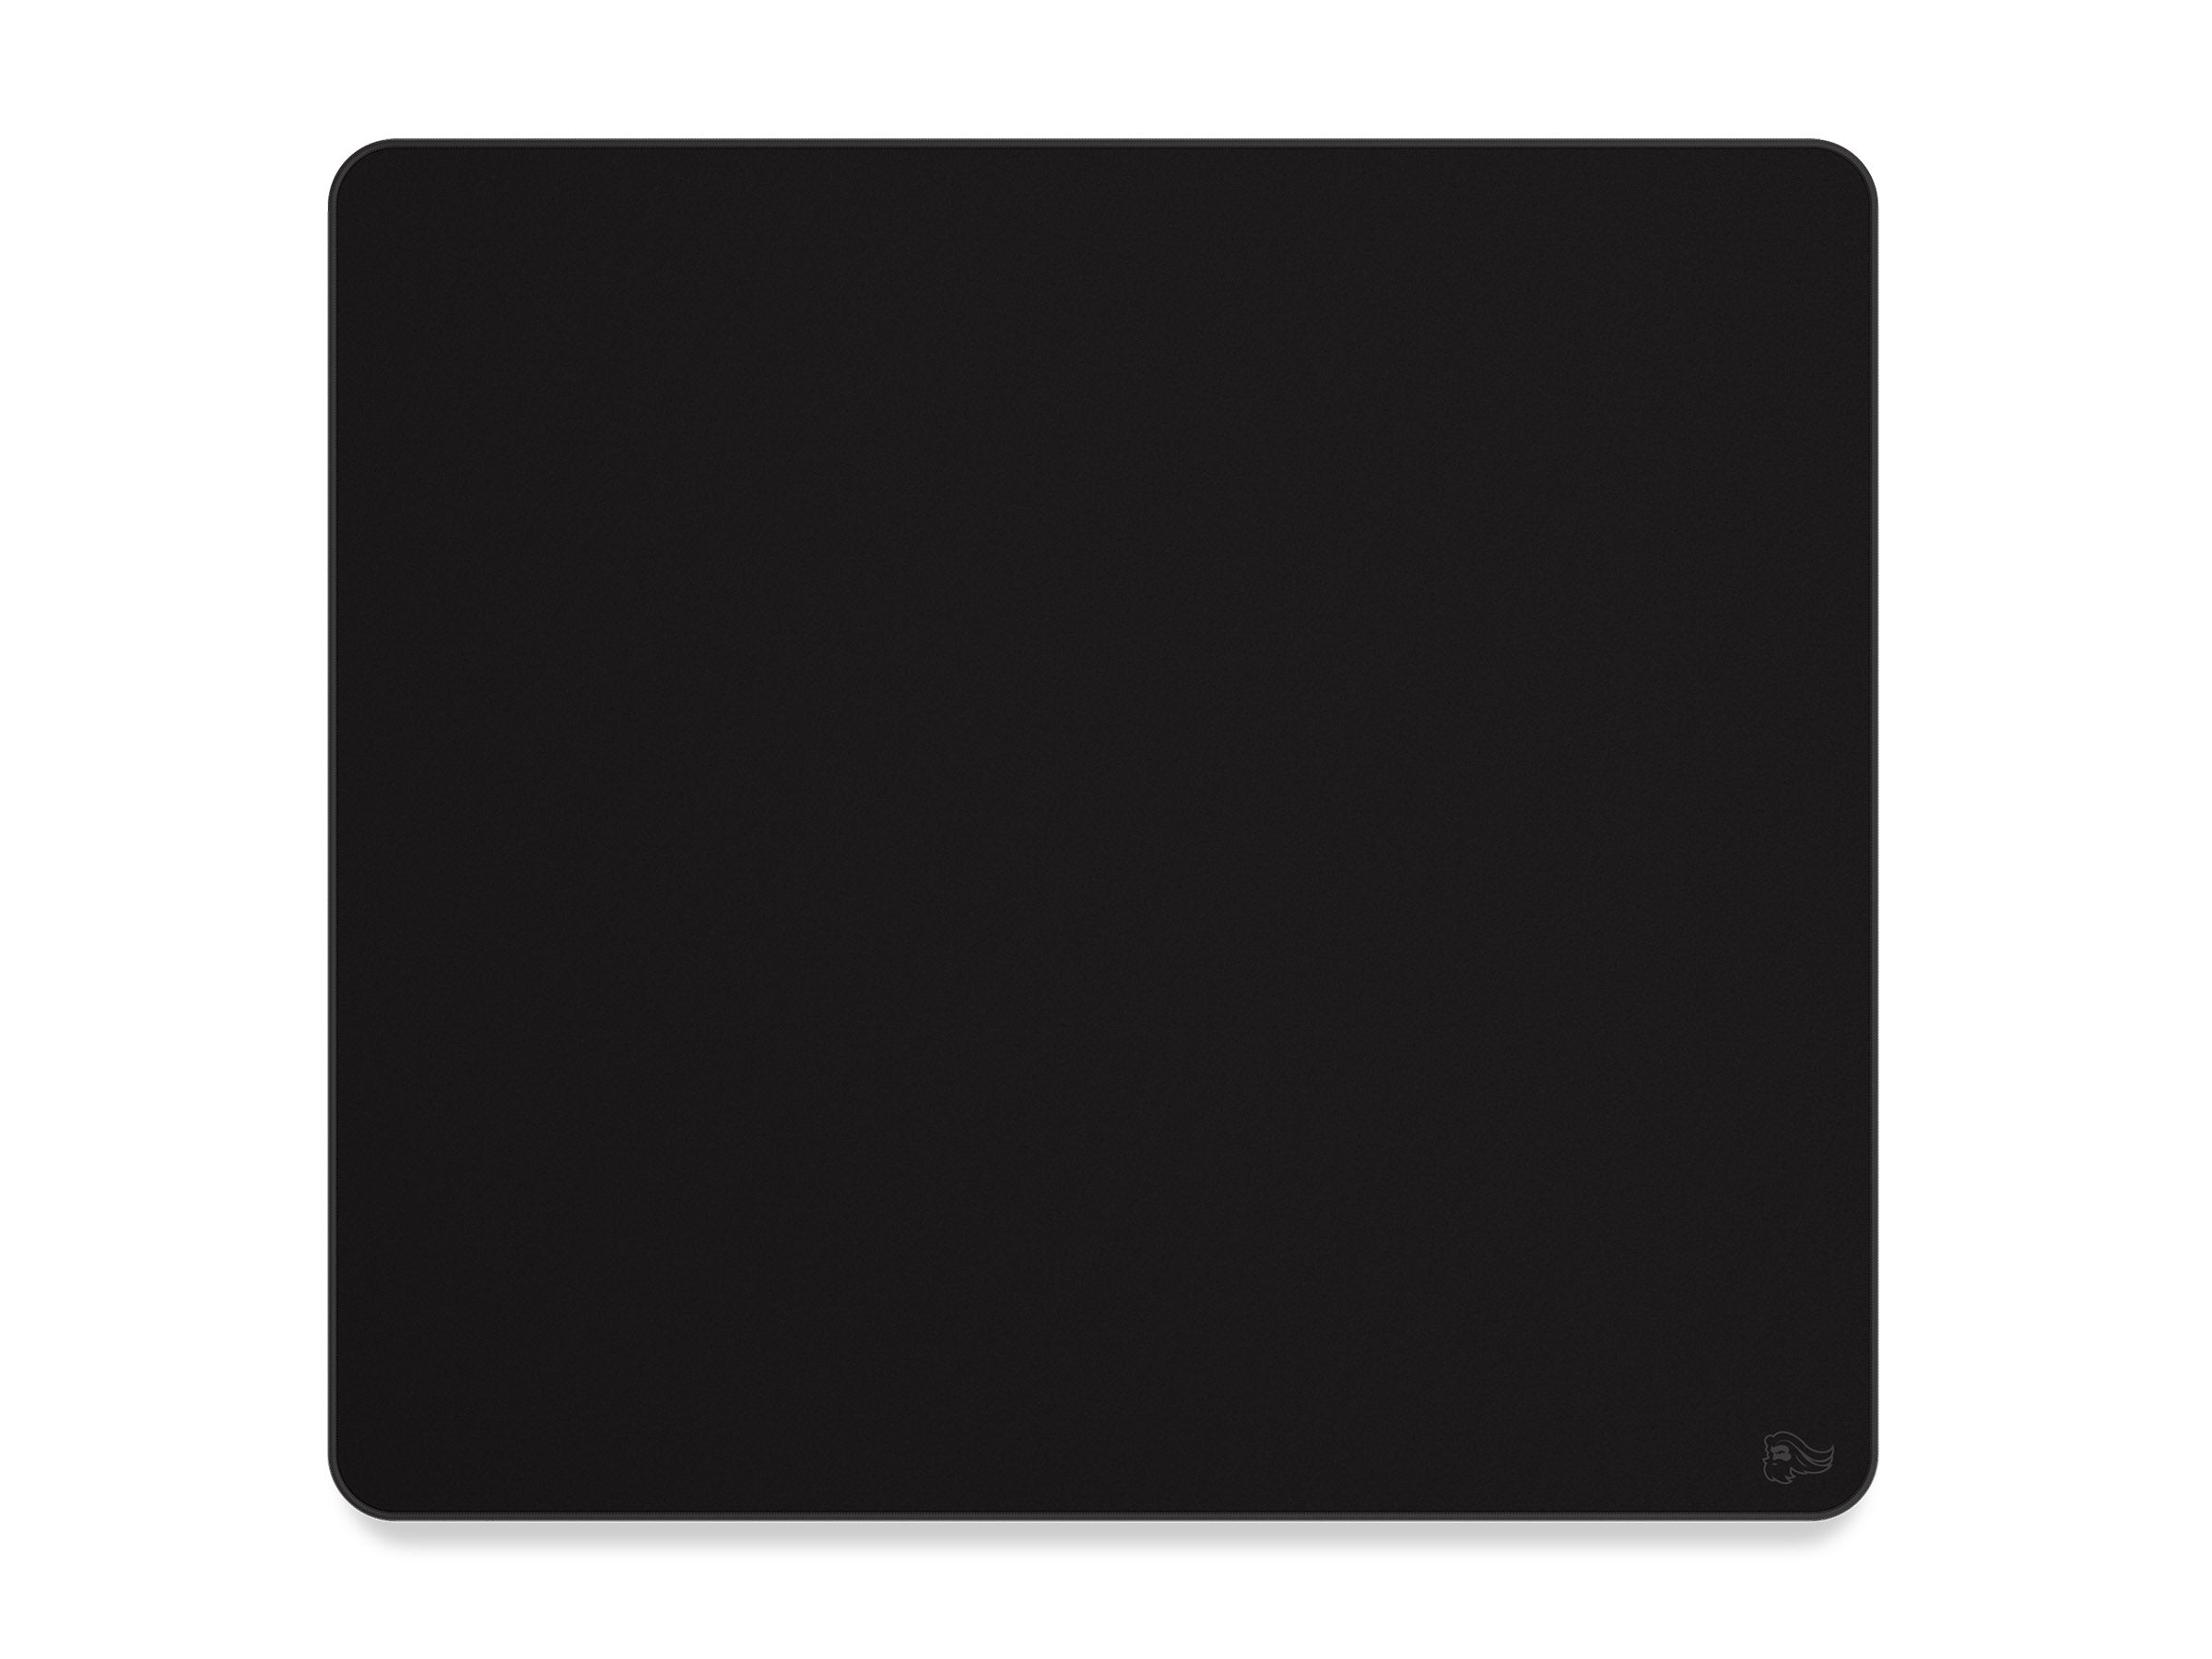 Glorious PC XL Stealth Desk / Mouse Pad MKFPFKFZ0I |0|